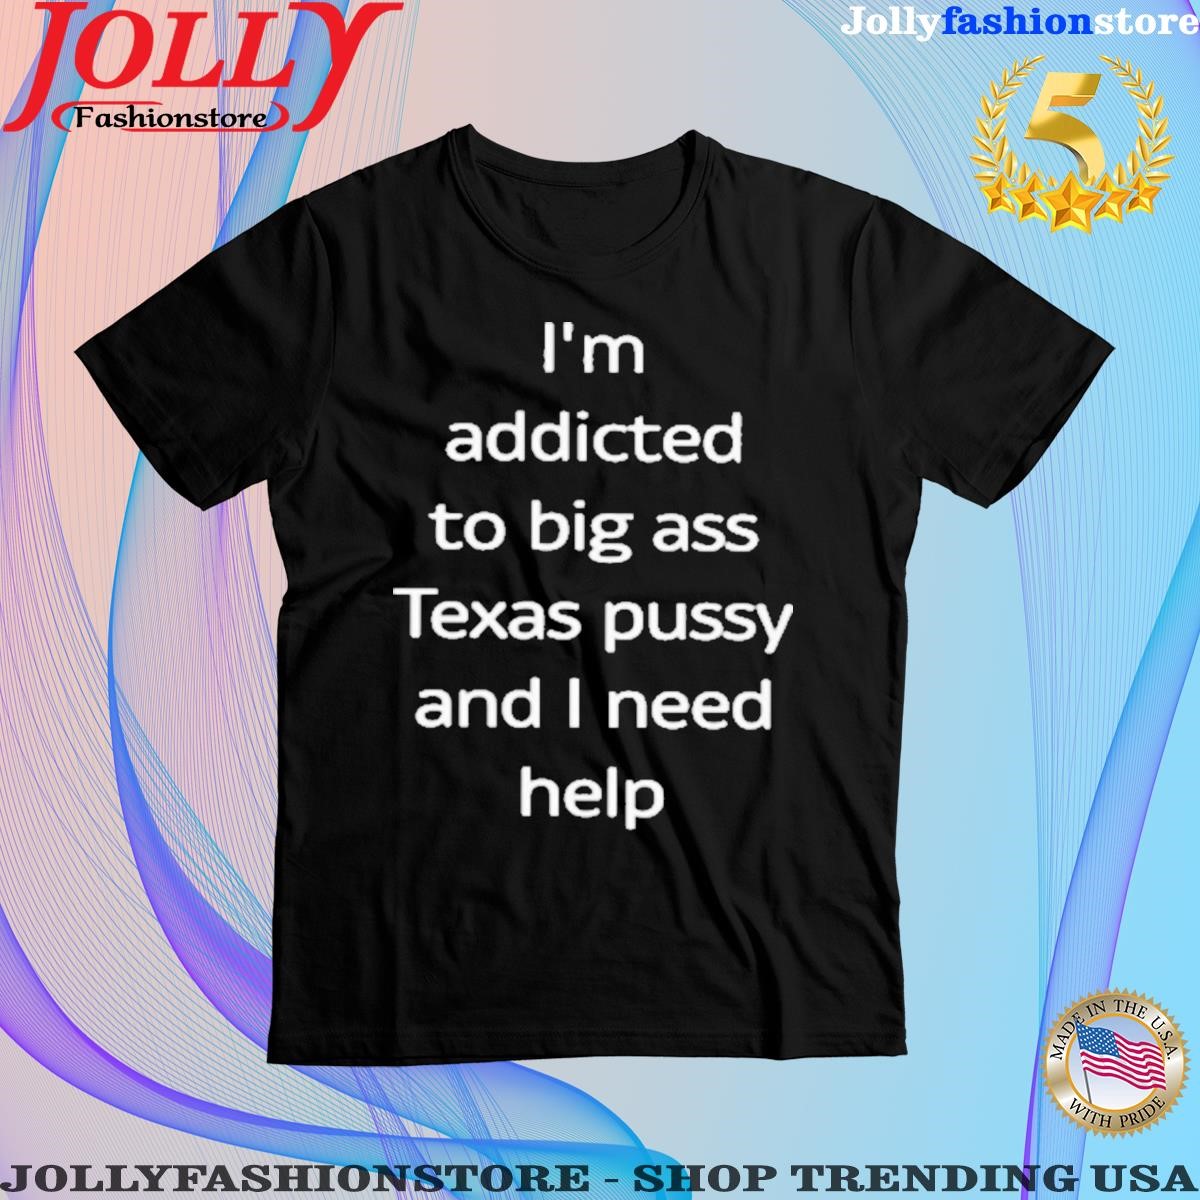 I'm addicted to big ass Texas pussy and I need help shirt